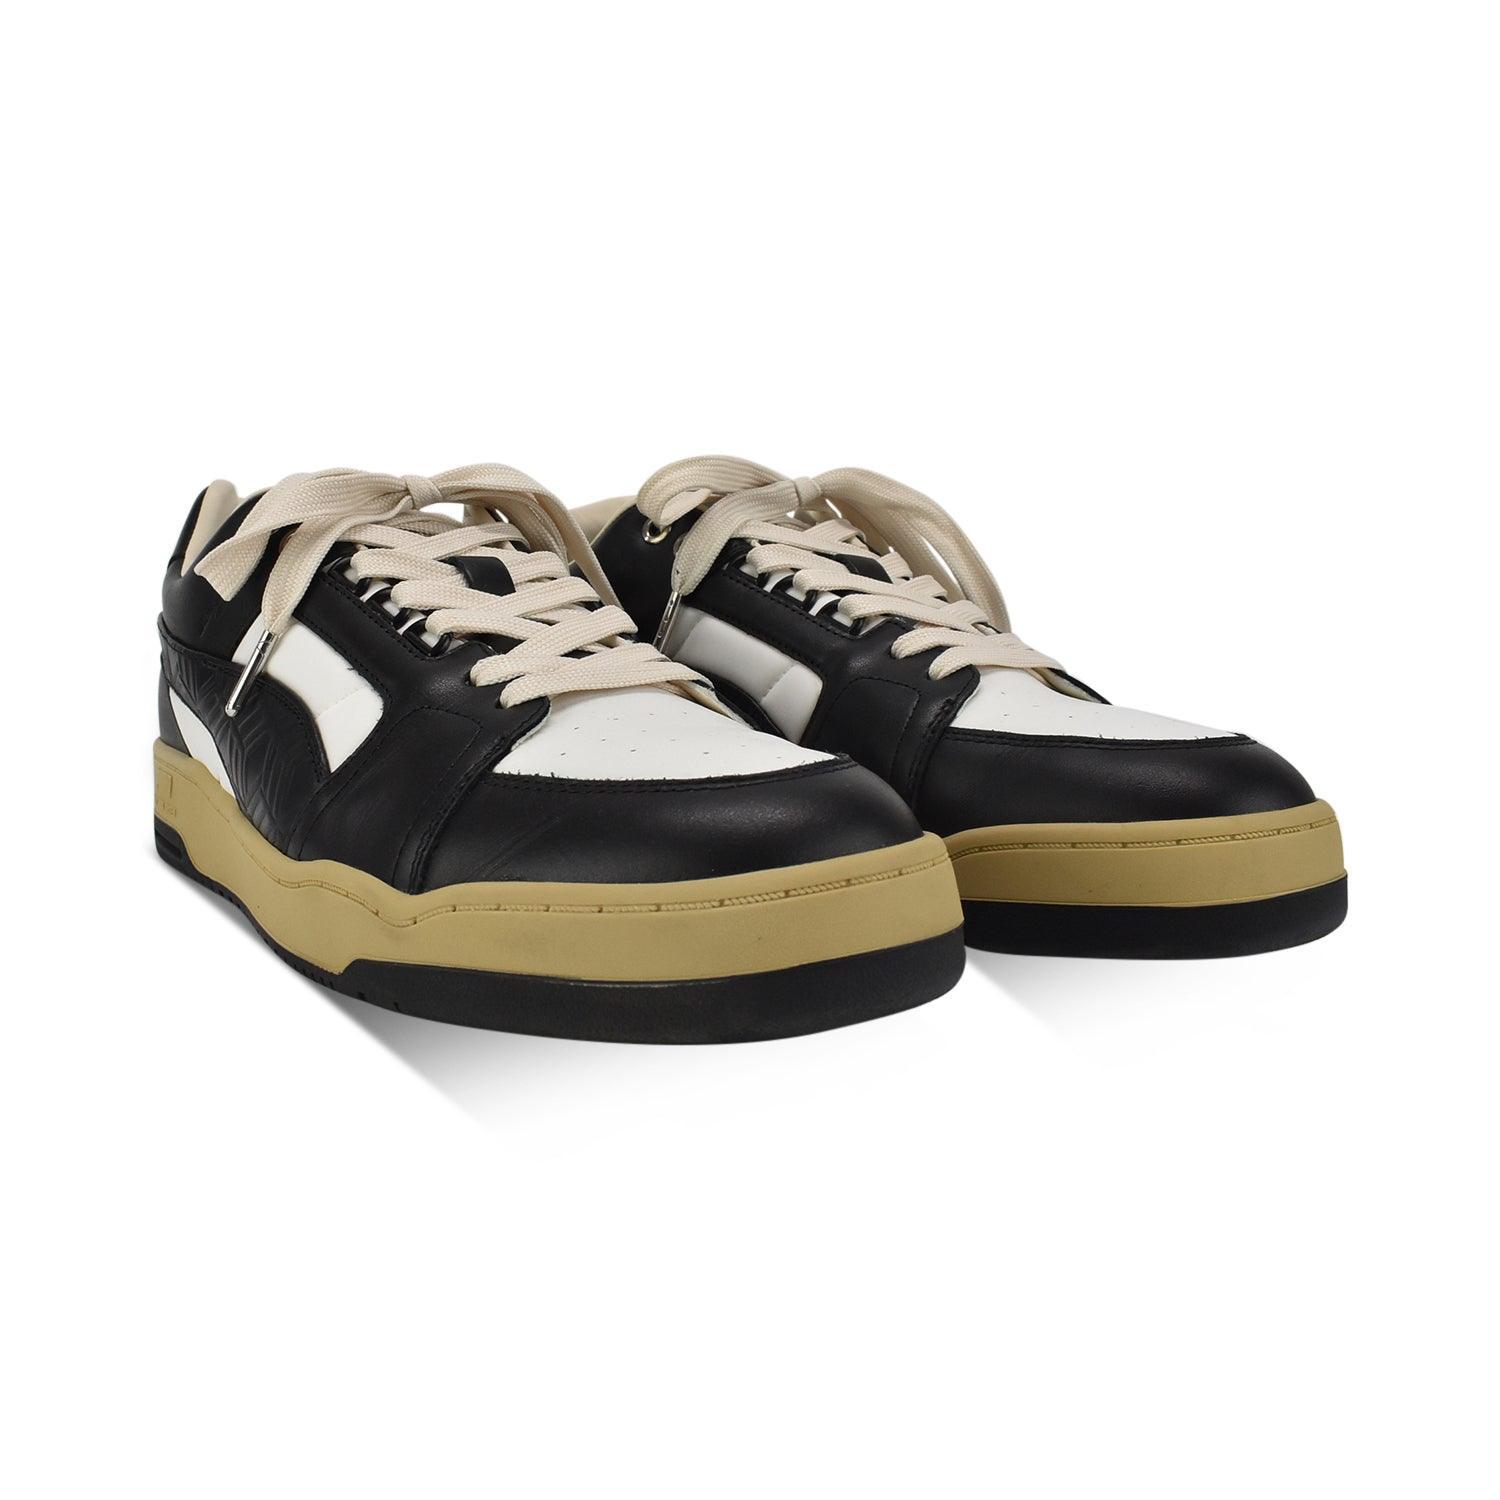 Puma x MCM Sneakers - Men's 11 - Fashionably Yours